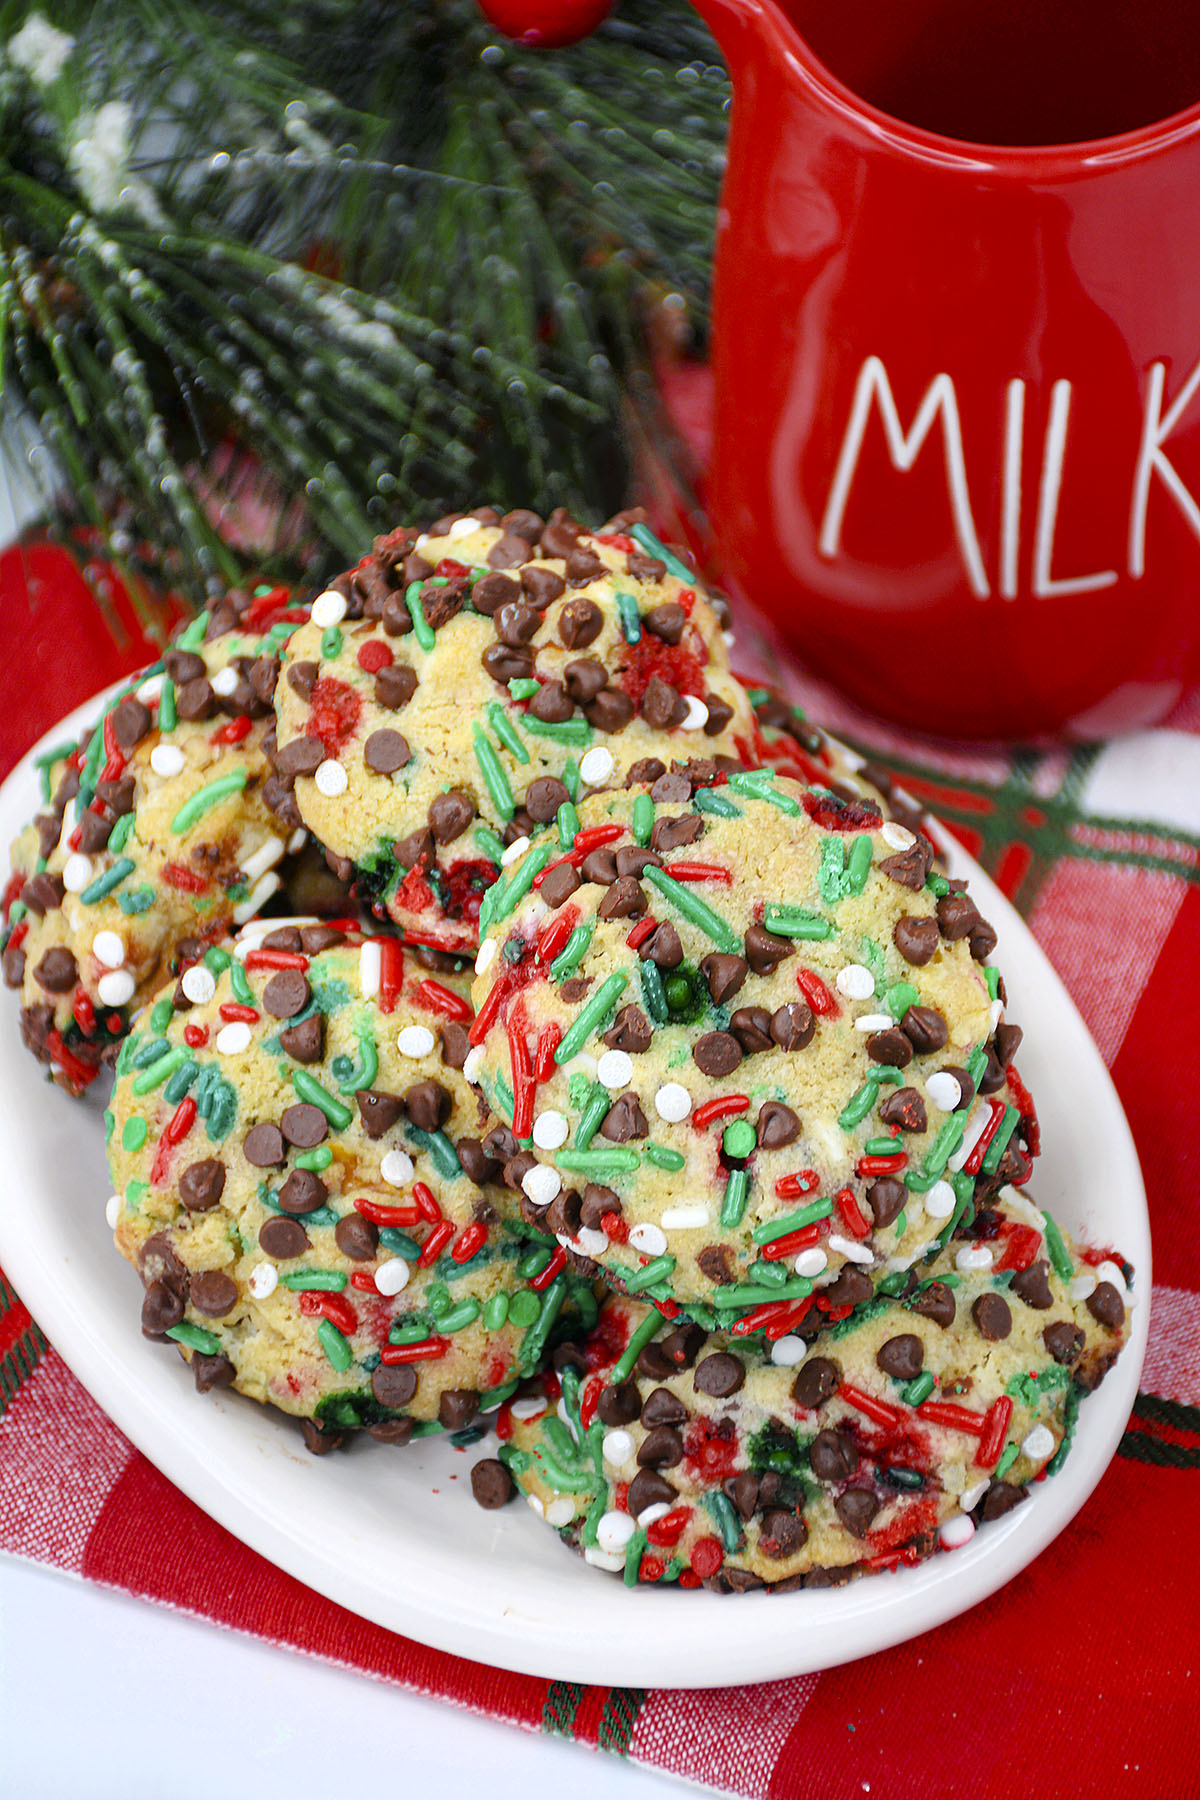 Decorated cookies are piled on top of eachother on a white plate.